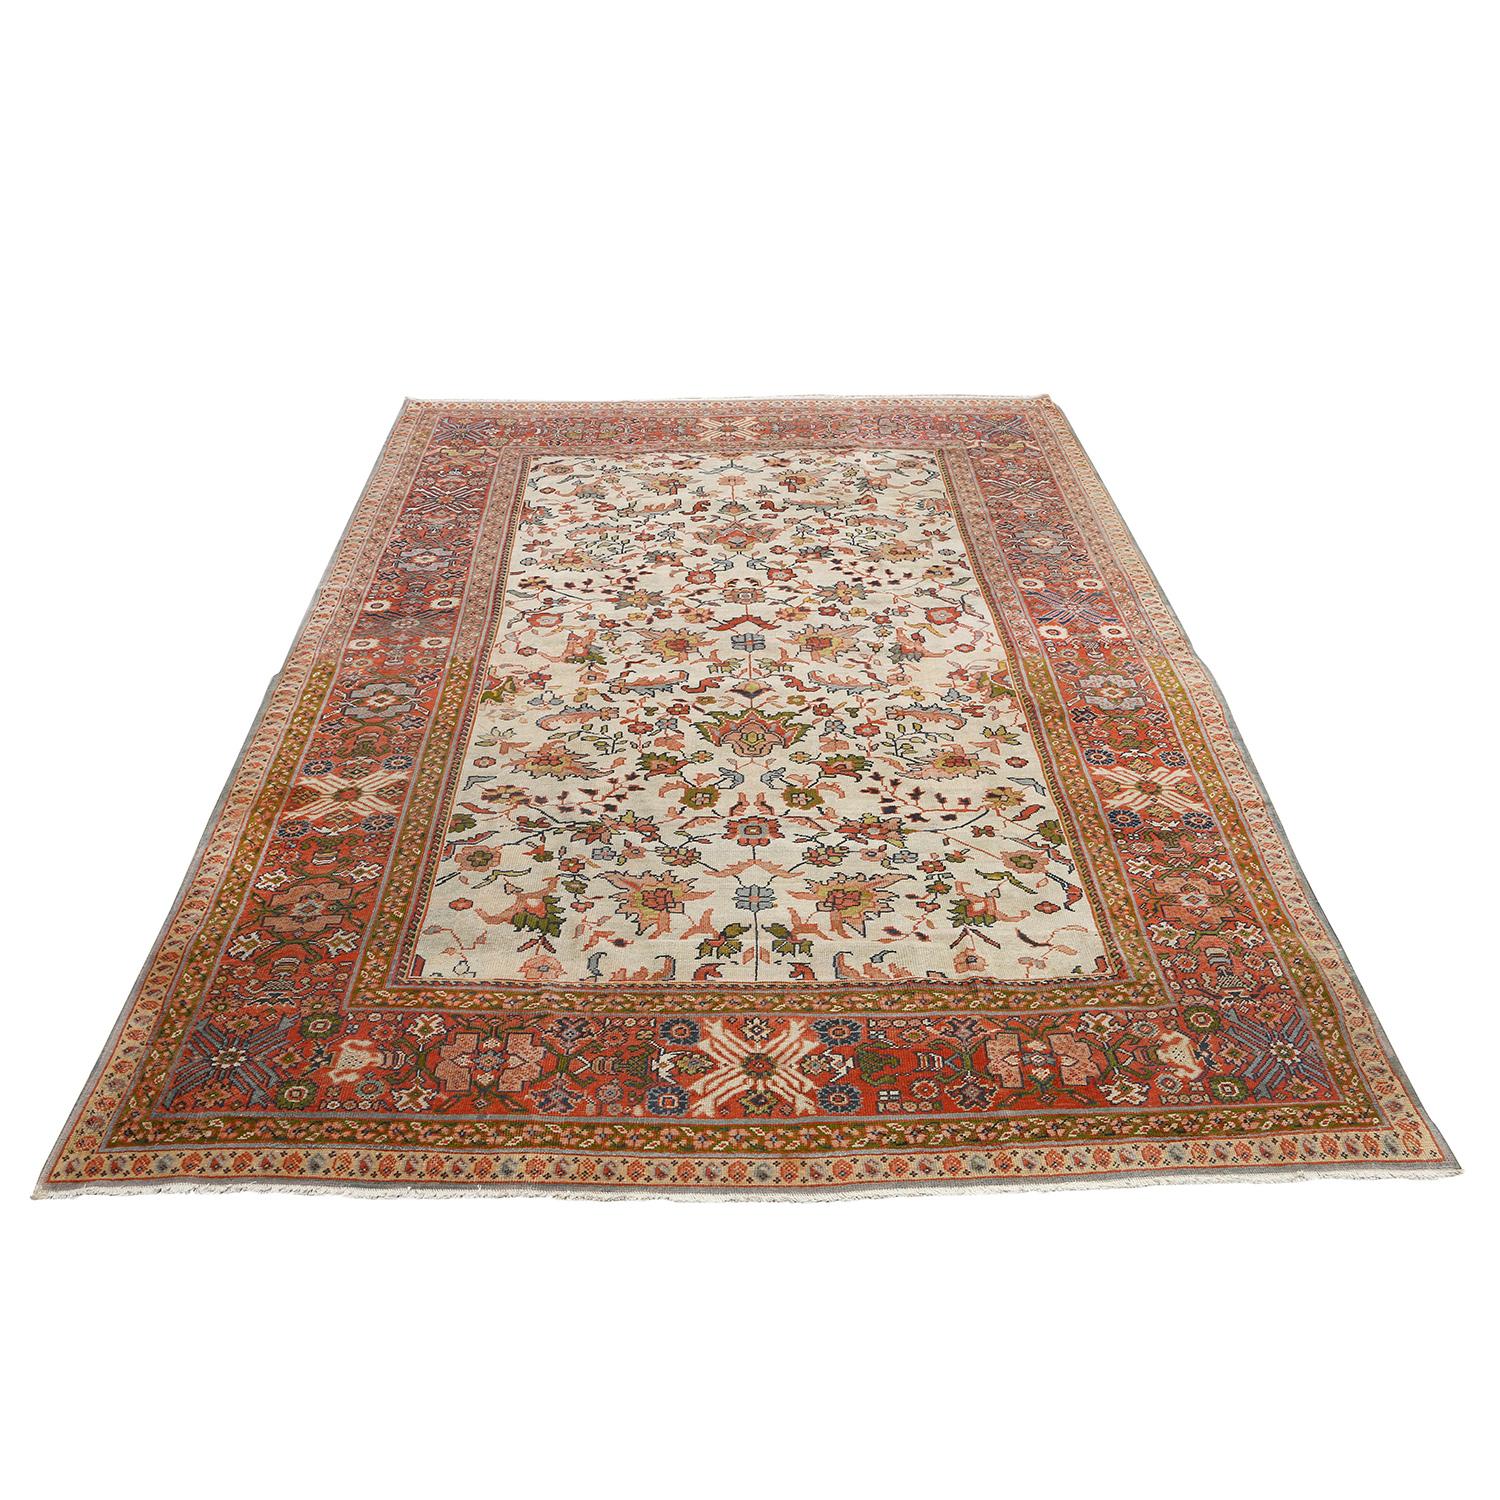 An Antique Sultanabad Rug adorned with an All-Over Design is a masterpiece that transcends time, blending the rich heritage of Persian craftsmanship with an enchanting symphony of patterns and colors. Originating from the distinguished weaving